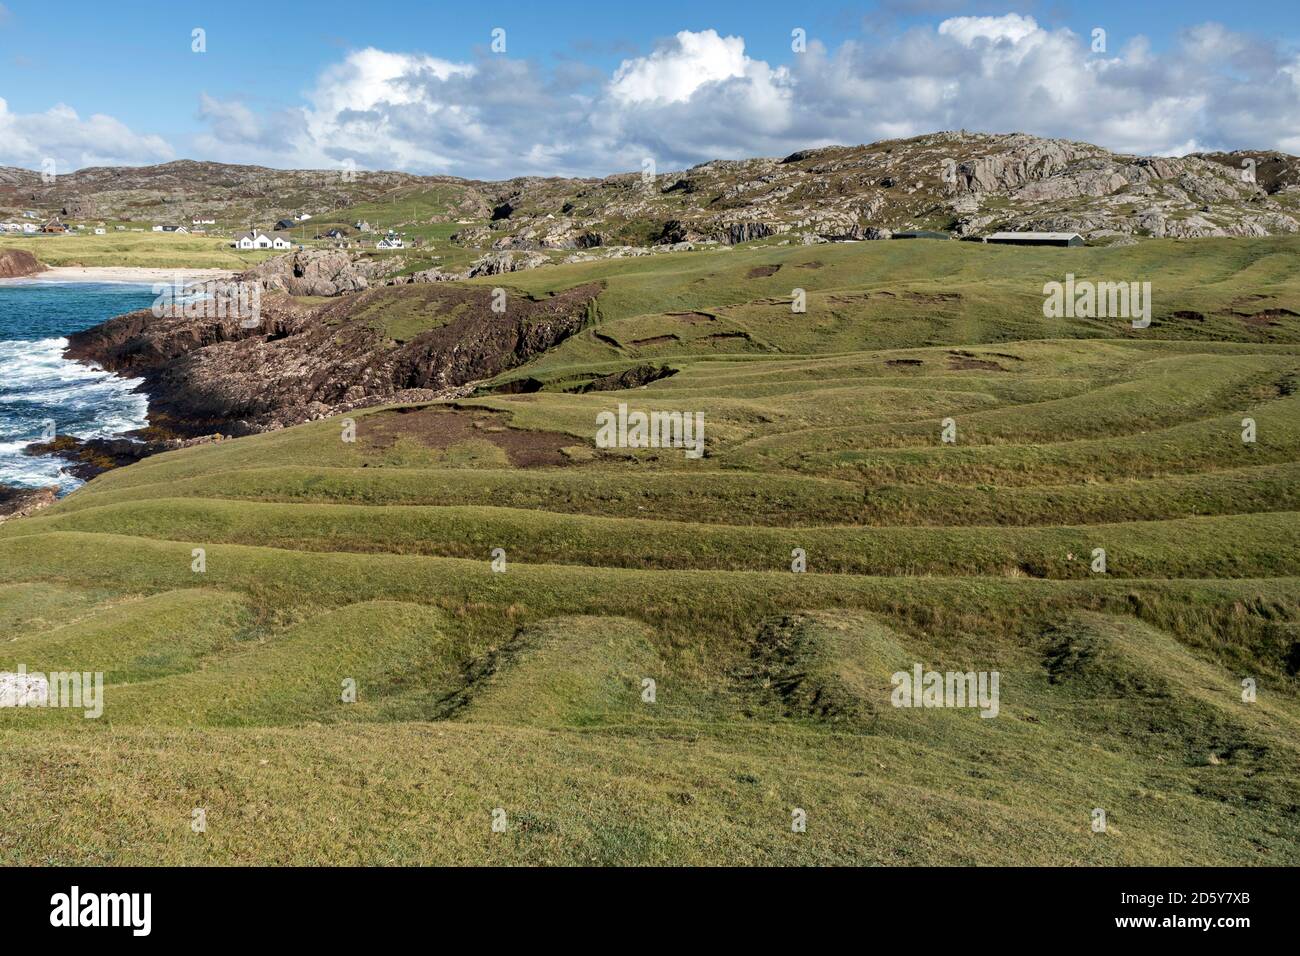 Abandoned Run-rig Strips, an Early System of Land Tenure and Cultivation Visible at Clachtoll, Assynt, NW Highlands, Scotland, UK Stock Photo